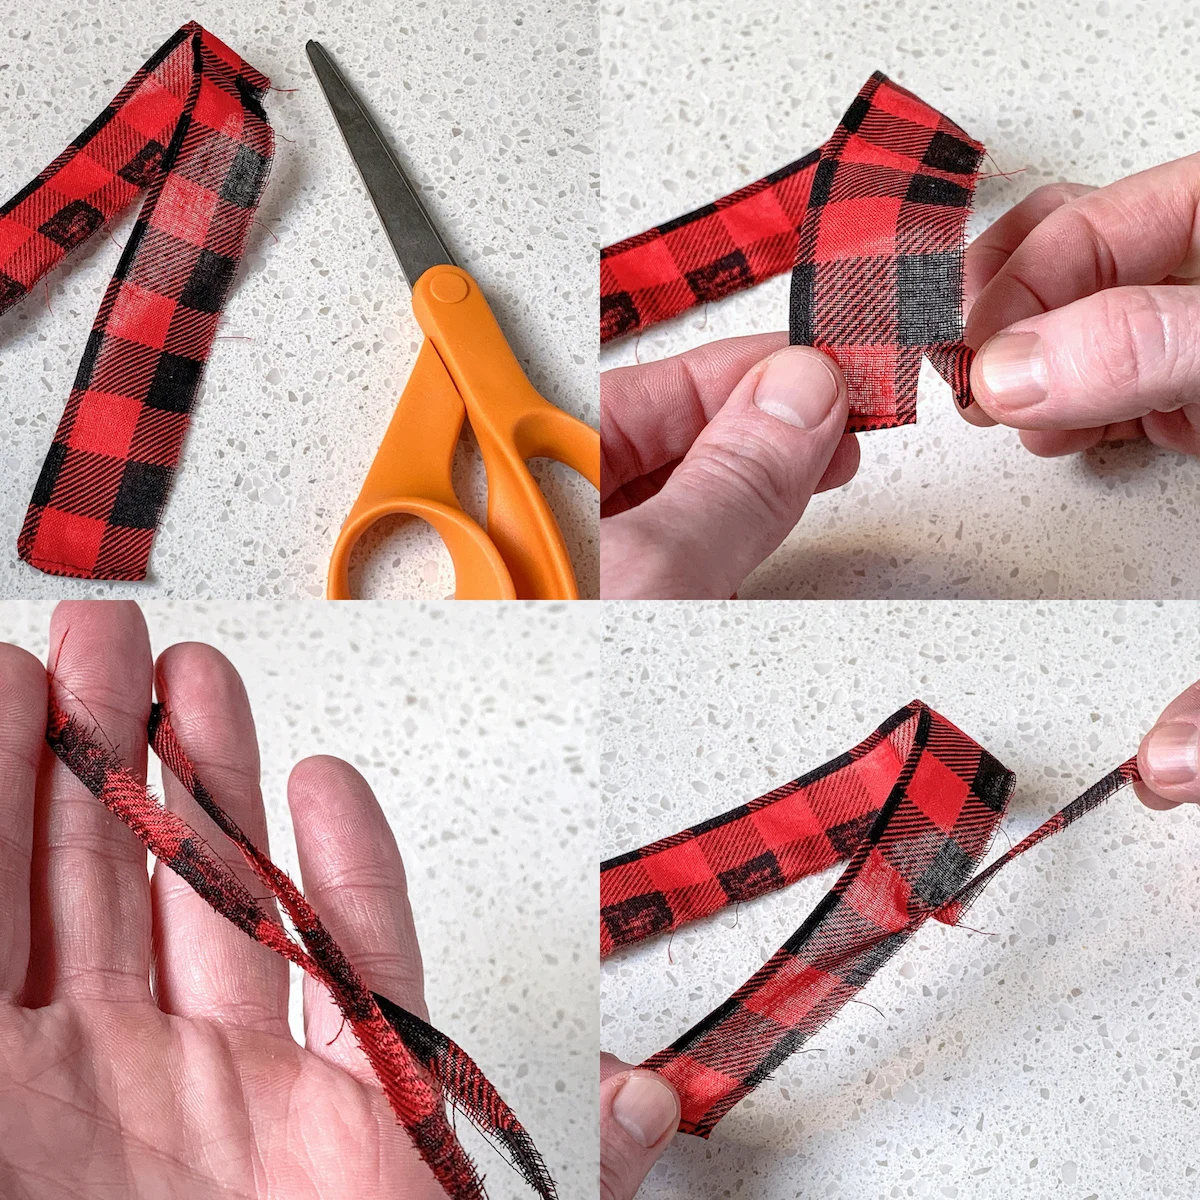 Cutting and ripping a piece of fabric for a scarf on an ornament